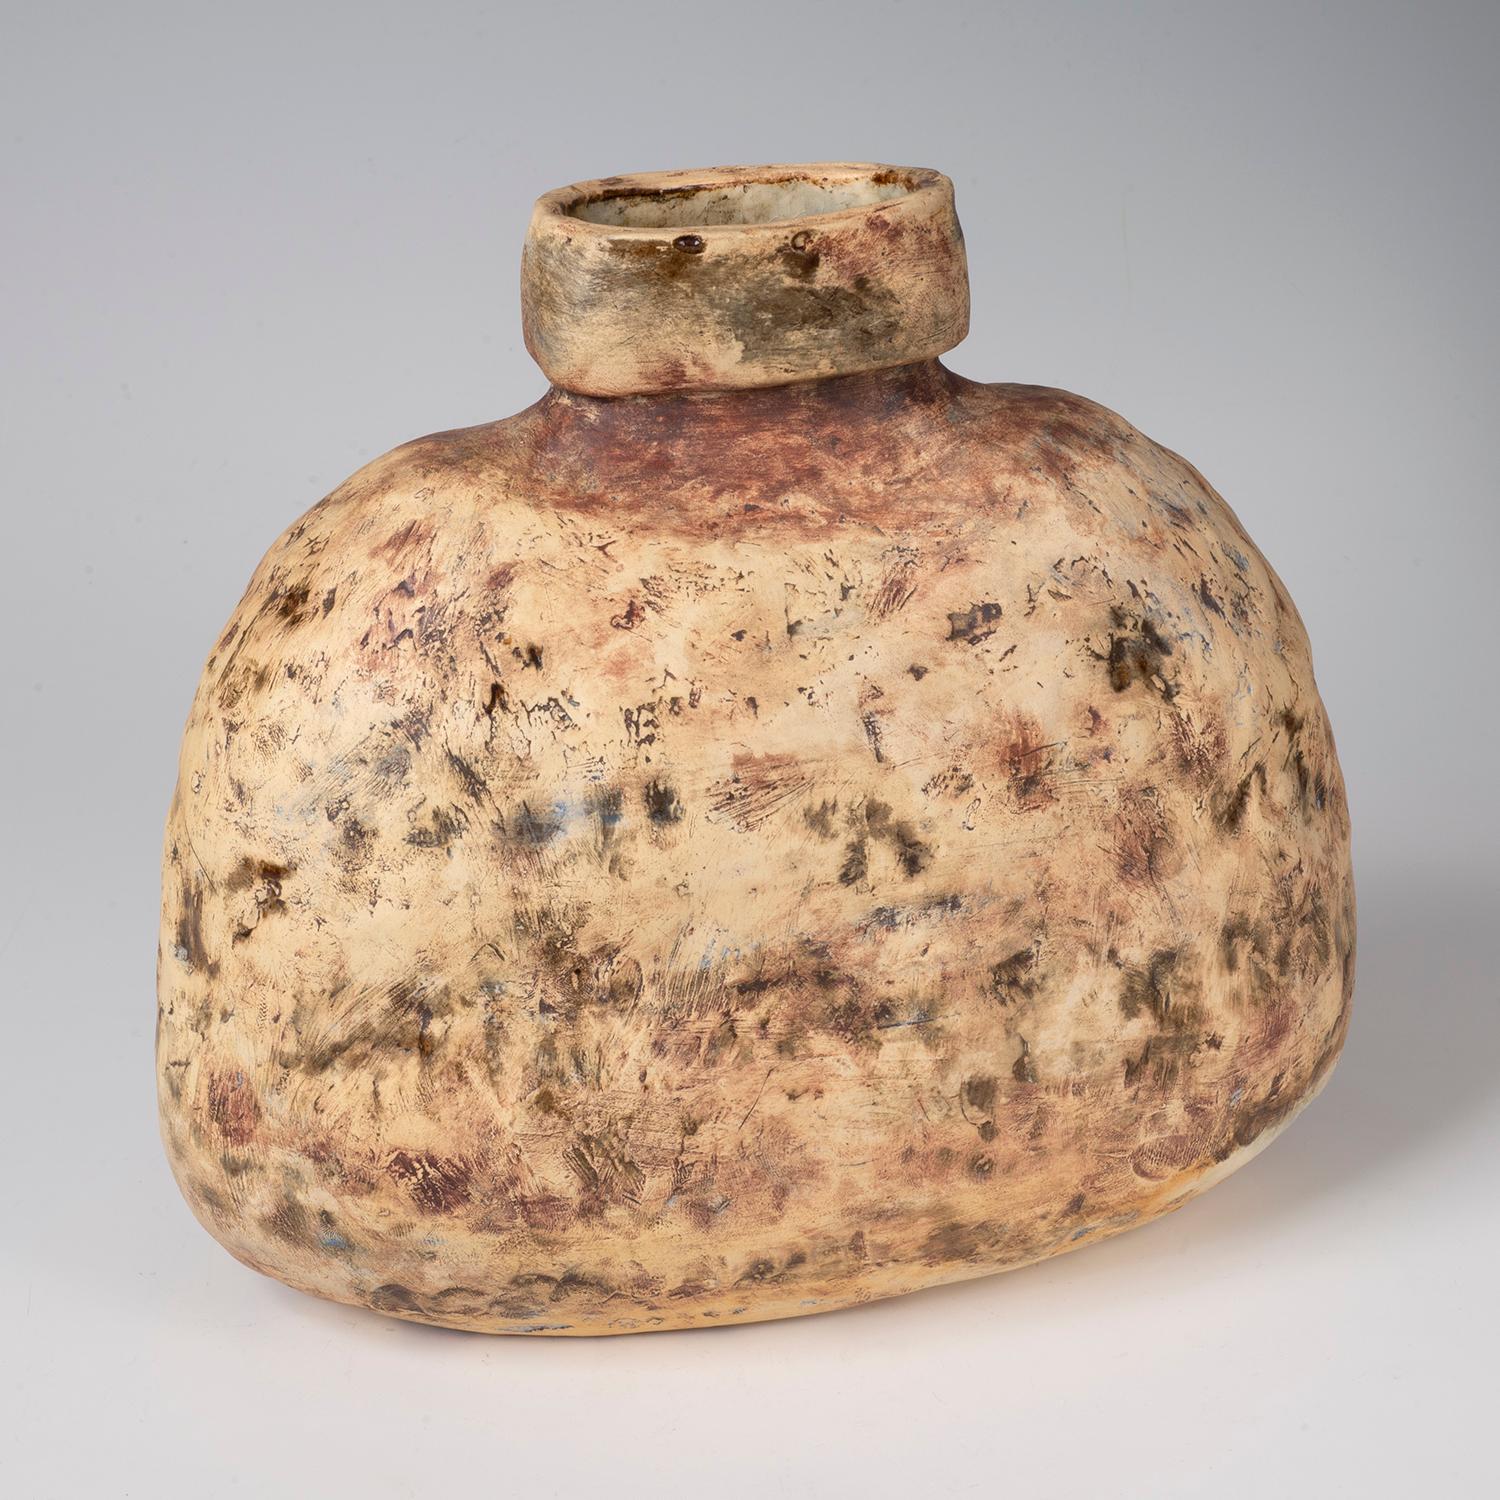 Untitled - Ceramic vessel functional sculpture earth tones by Marc Cohen